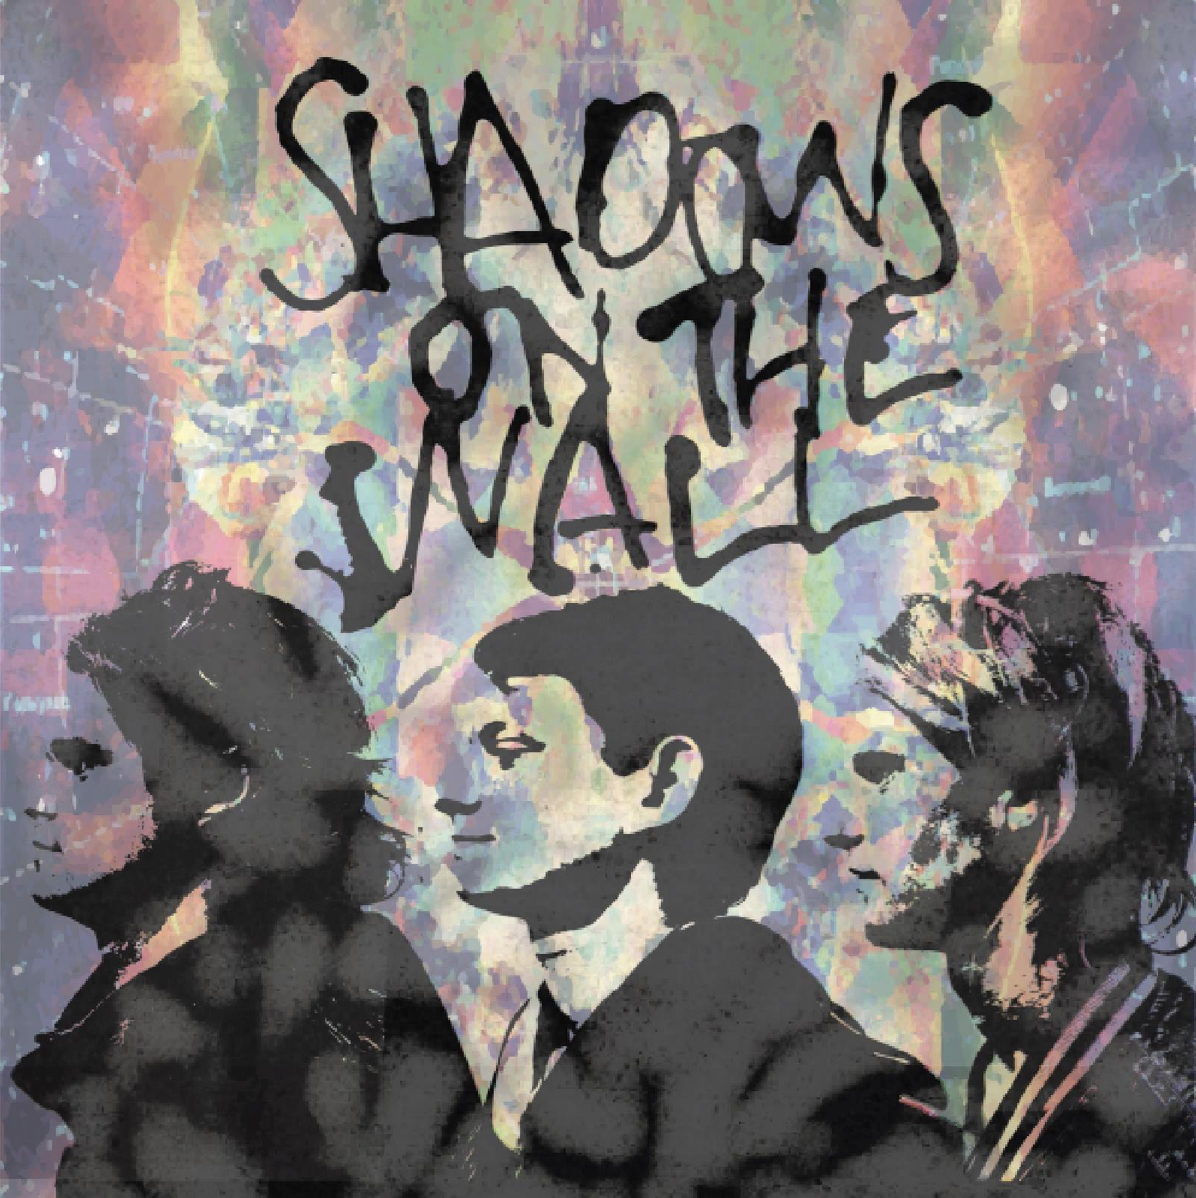 CD Review - 'Shadows On The Wall' - blog post image 